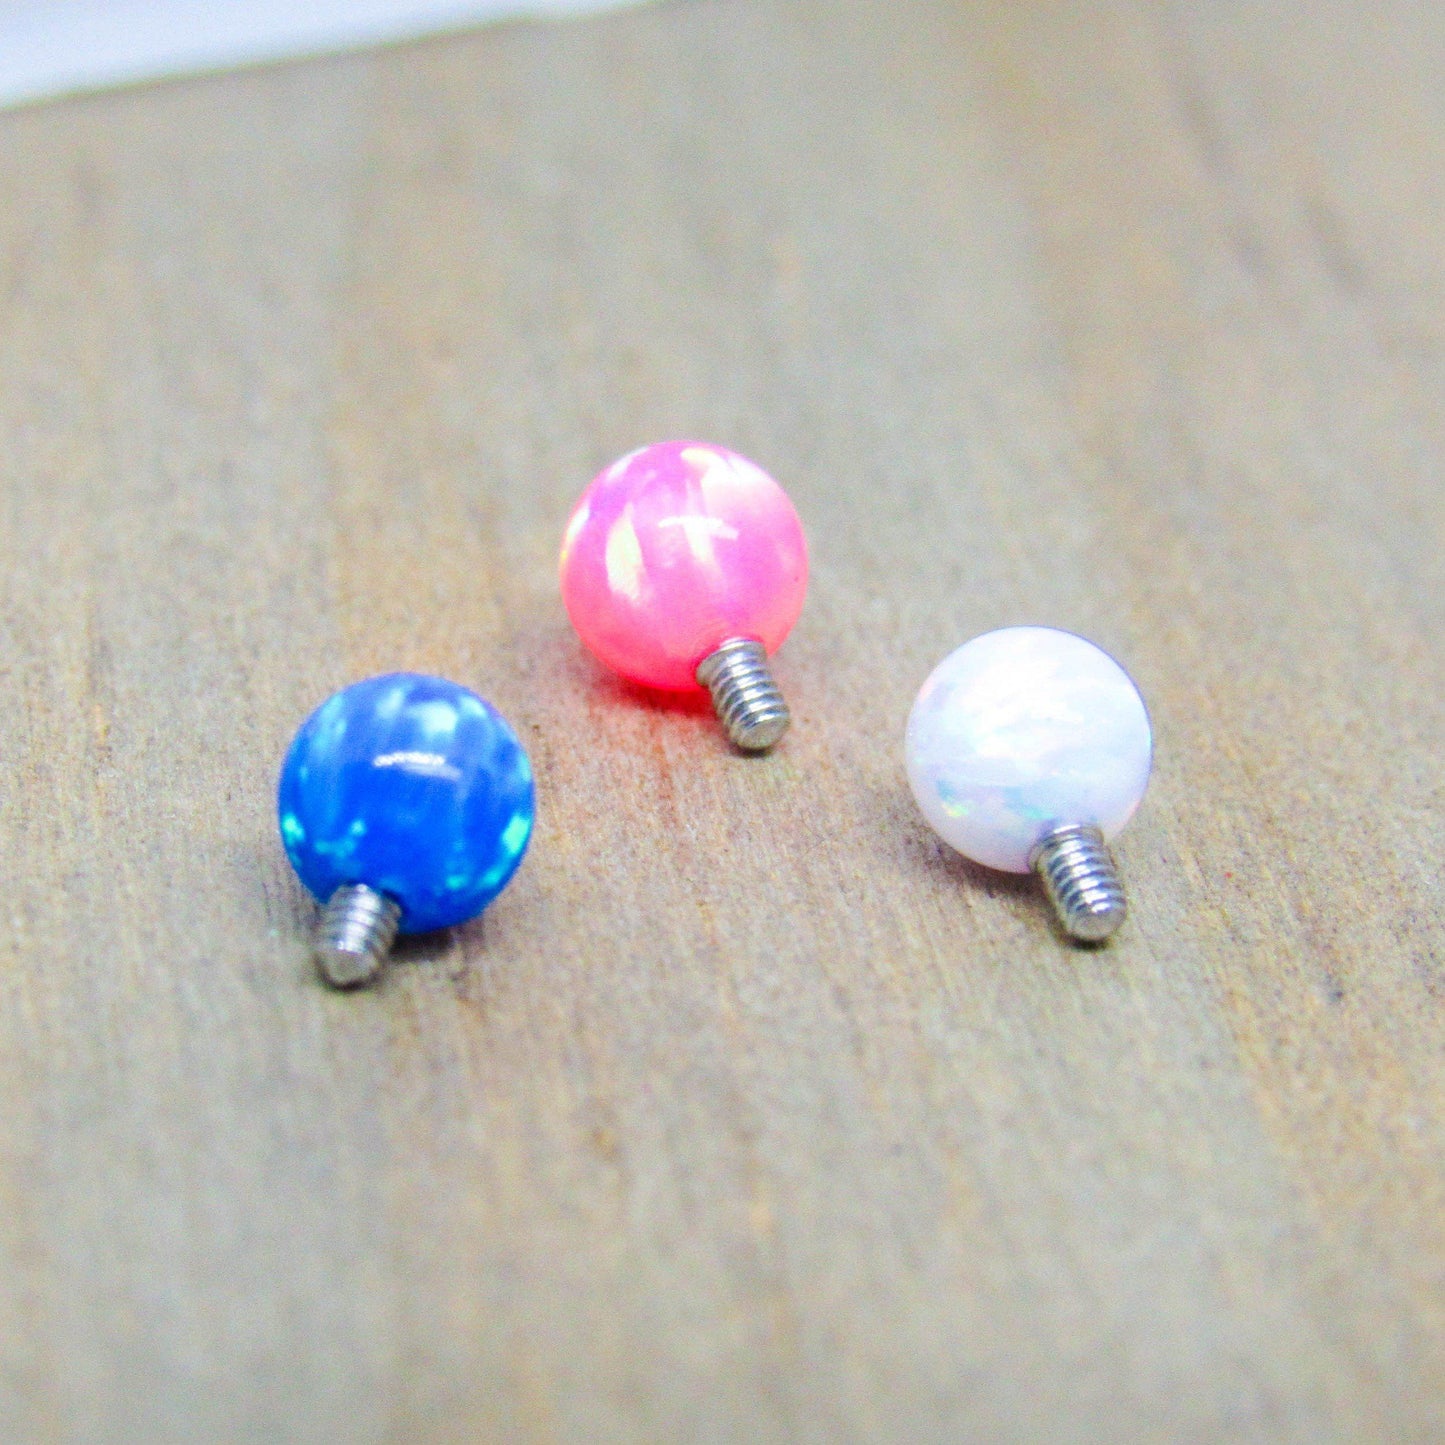 14g 4mm white opal ends pink blue round parts